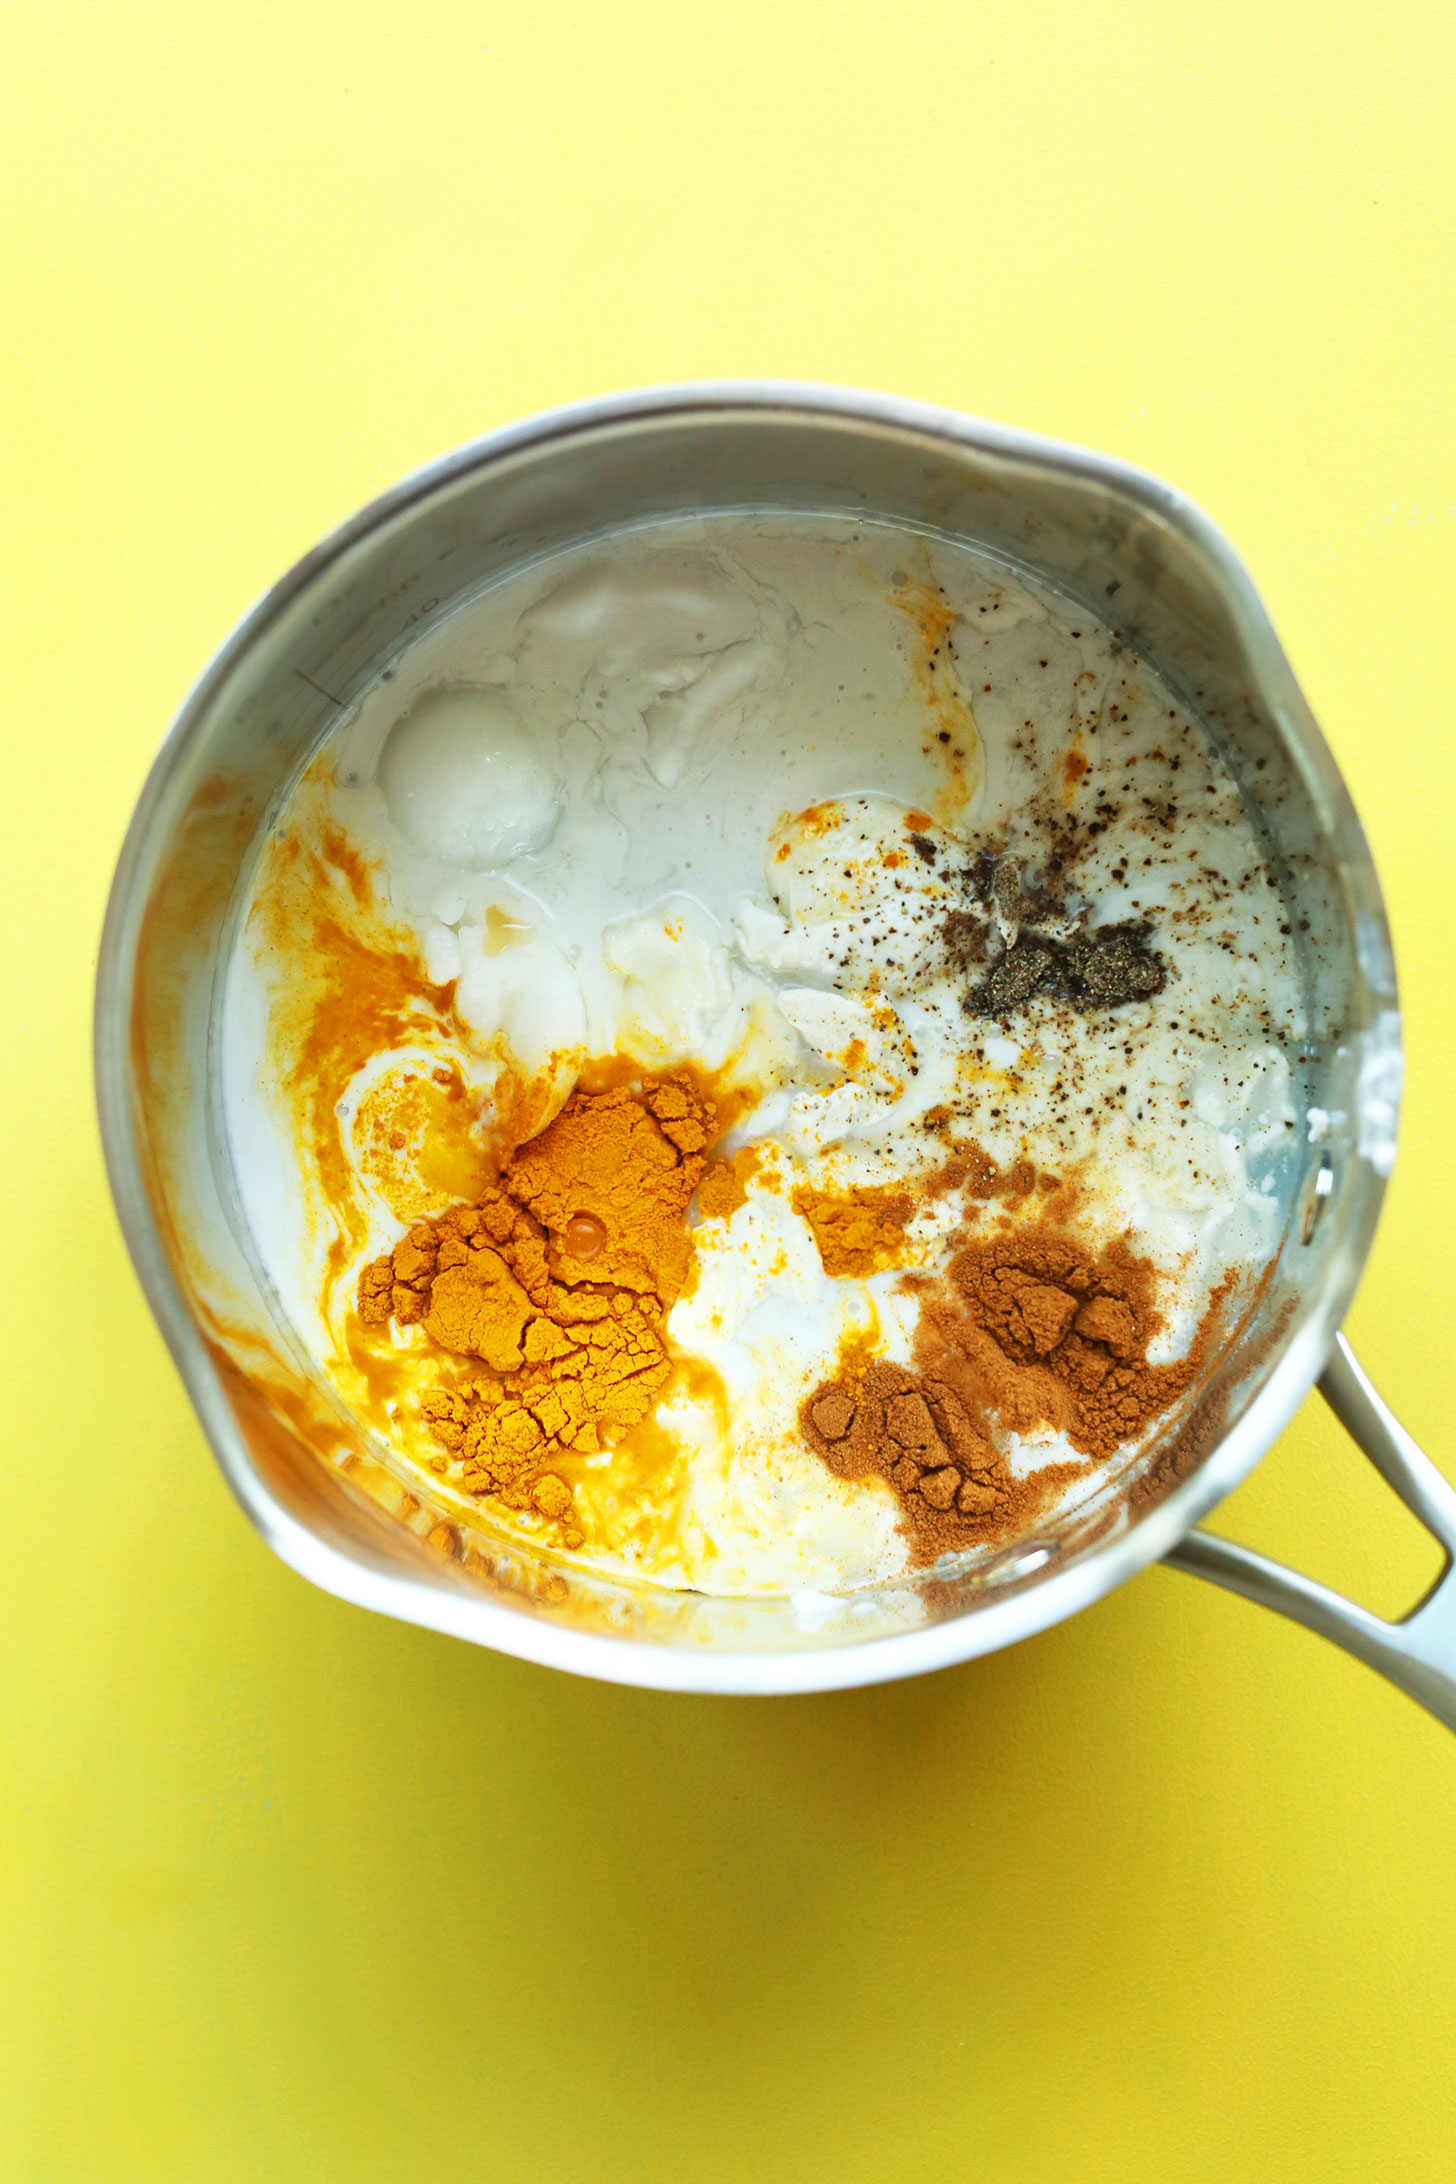 Mixing spices and coconut milk to make homemade vegan ice cream